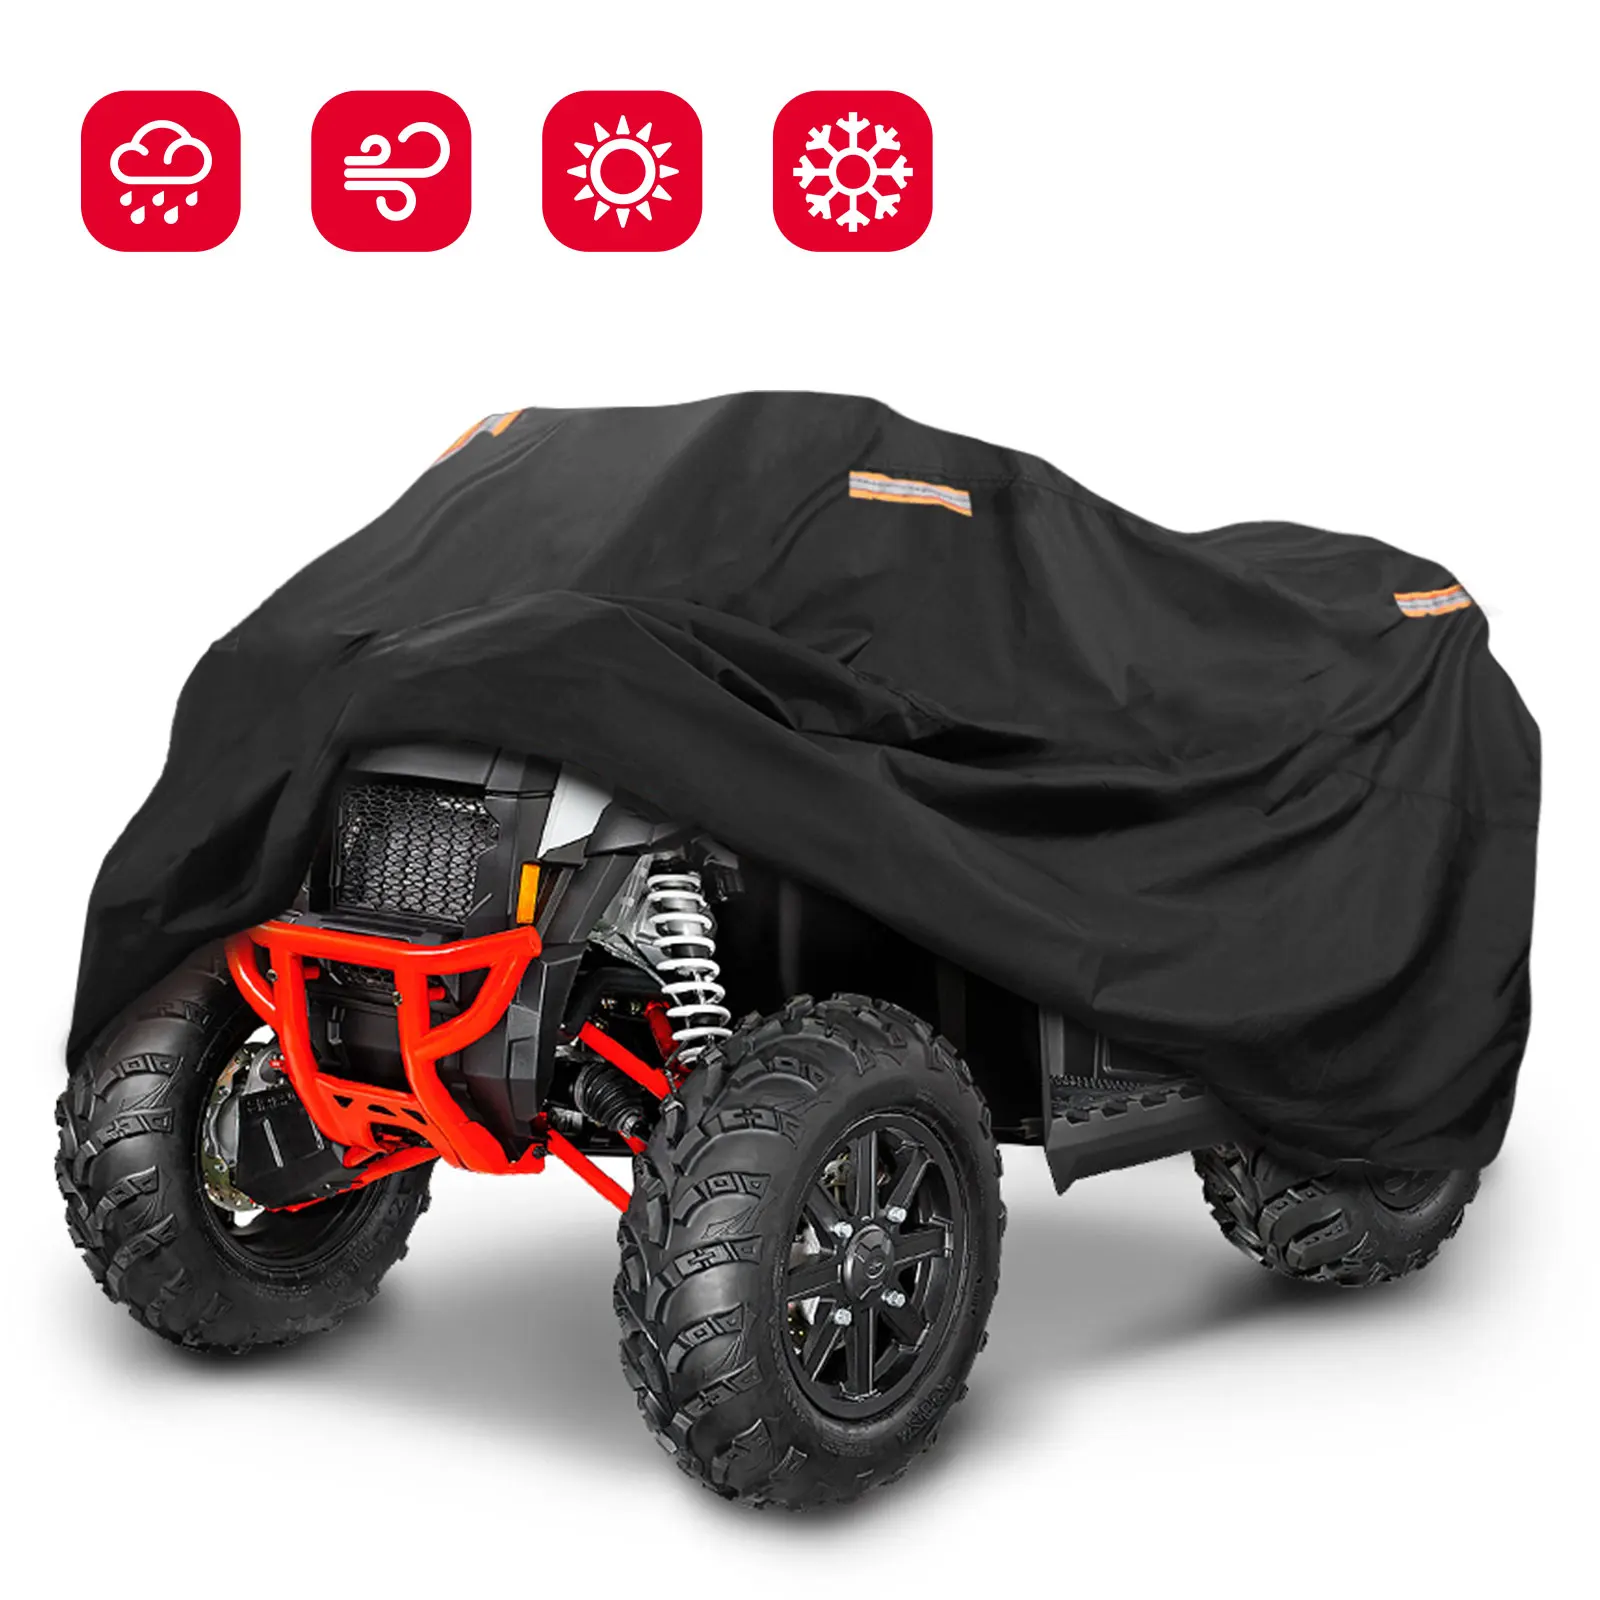 KEMIMOTO 300D ATV Waterproof Cover Heavy Duty Covers for Yamaha Raptor 700 Compatible with Polaris Sportsman for Can am 94x48x48